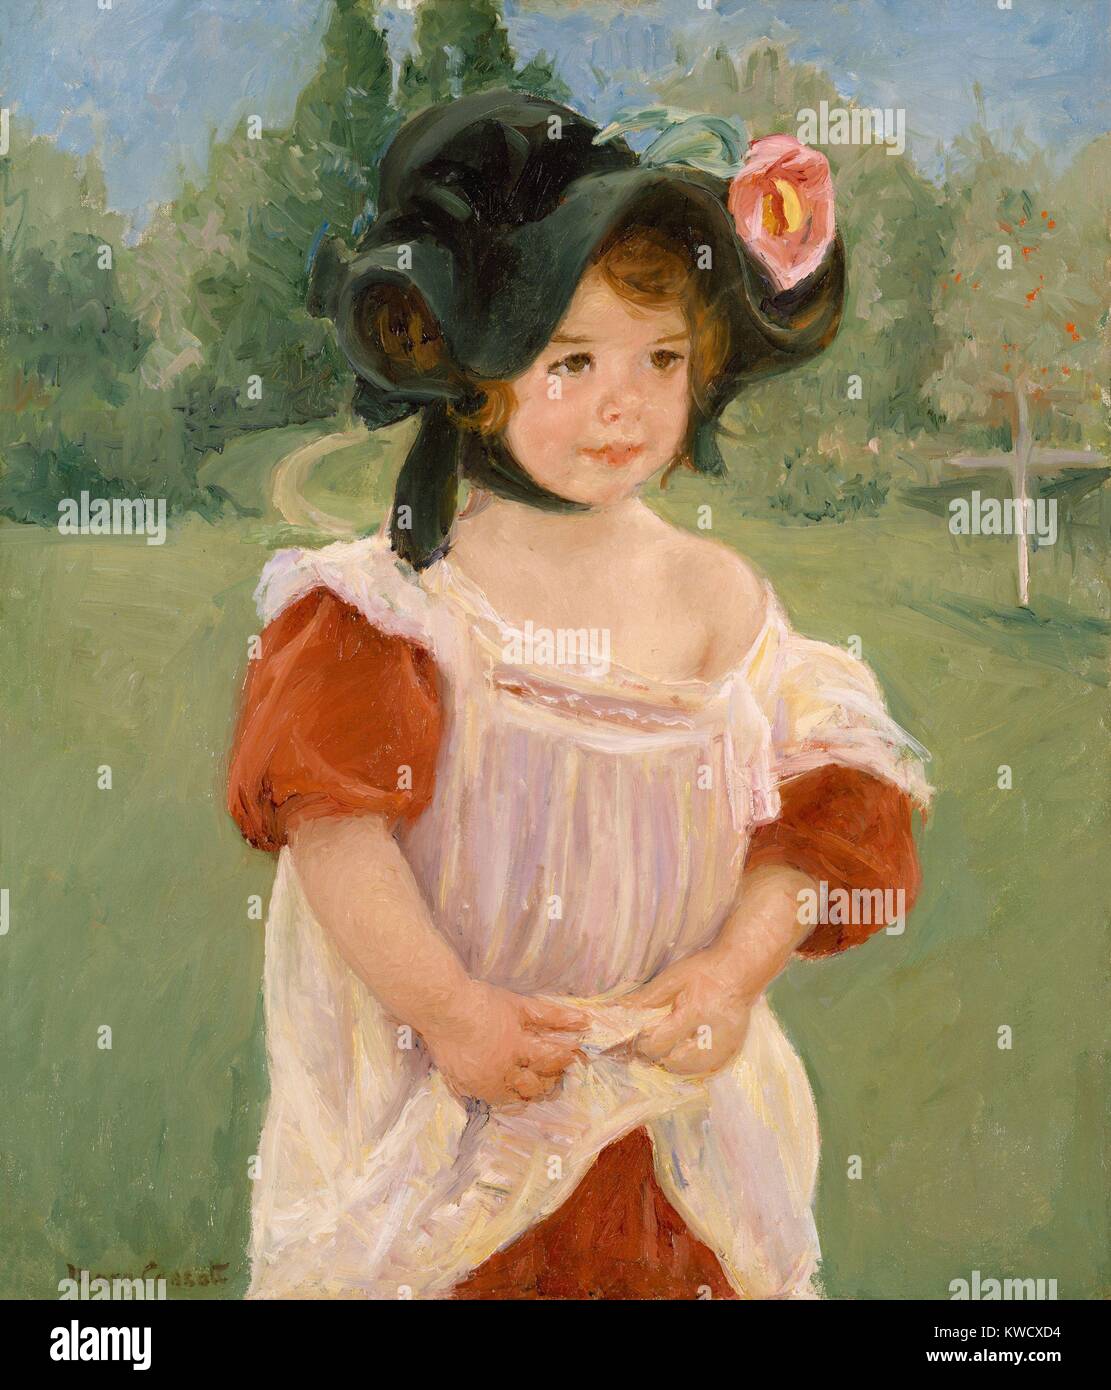 Margot Standing in a Garden, by Mary Cassatt, 1900, French impressionist painting, oil on canvas. Margot Lux, a child from the village near Cassatt’s country home, was the model for this painting (BSLOC 2017 3 141) Stock Photo